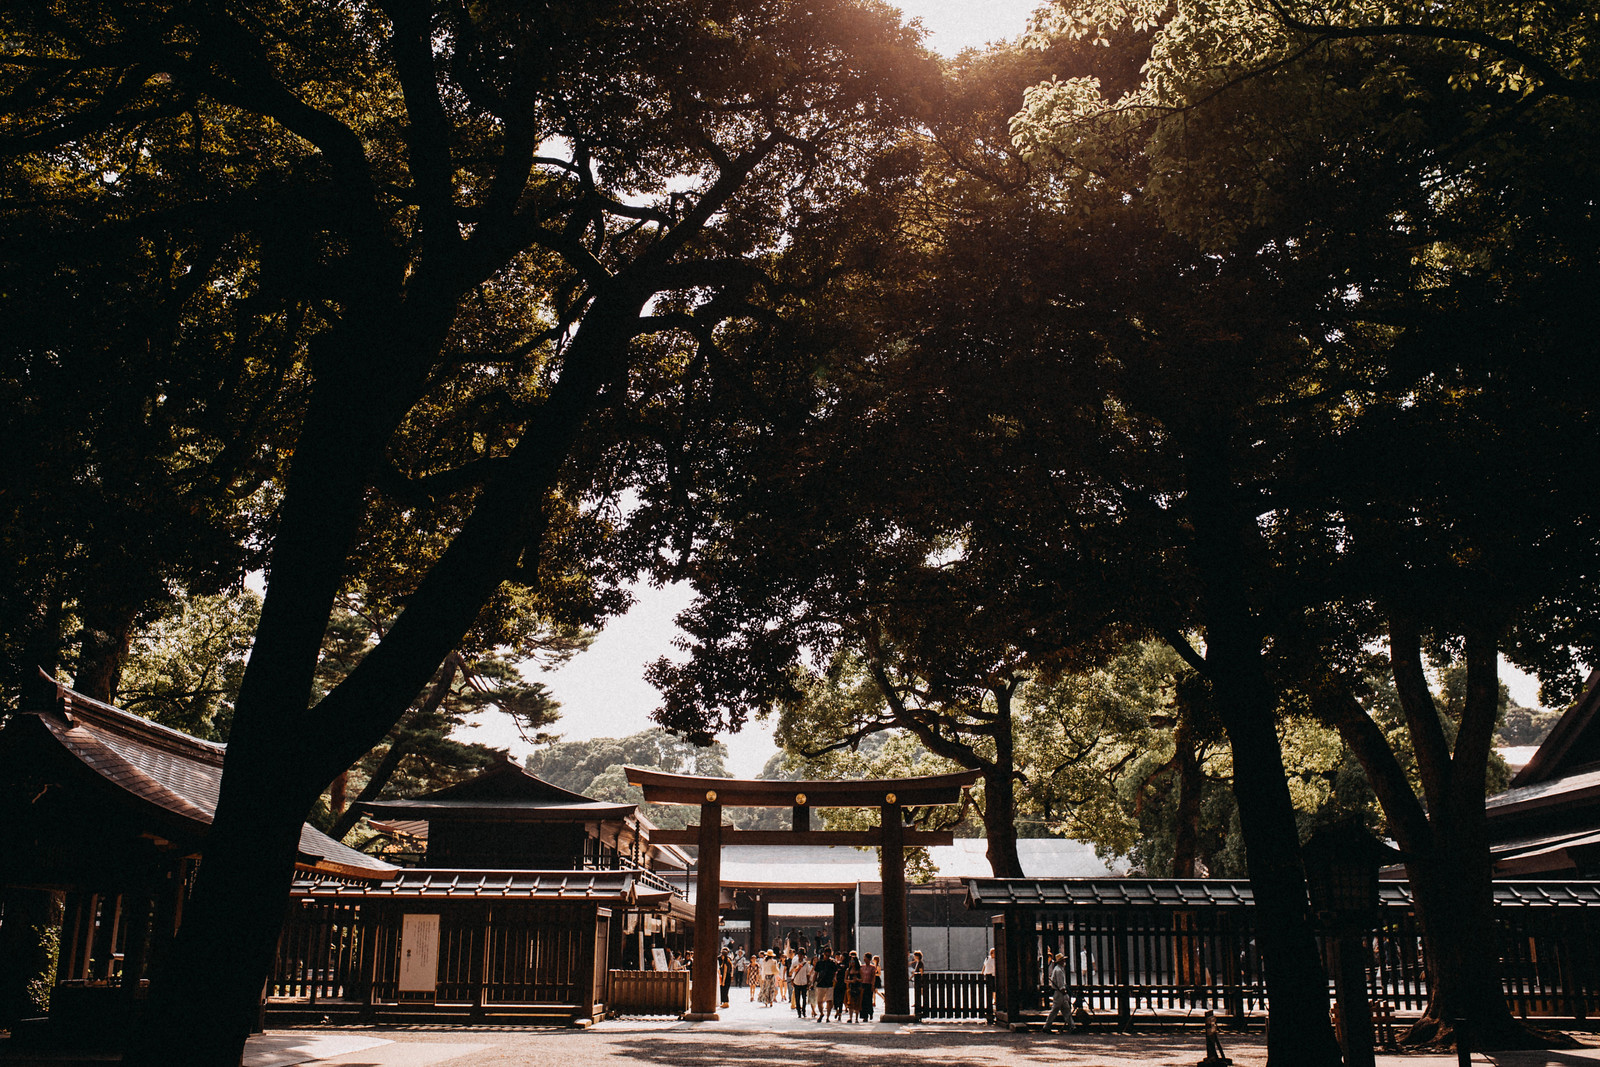 View of Meiji Jingu Shrine. Reasons why to visit Tokyo Japan include this beautiful place